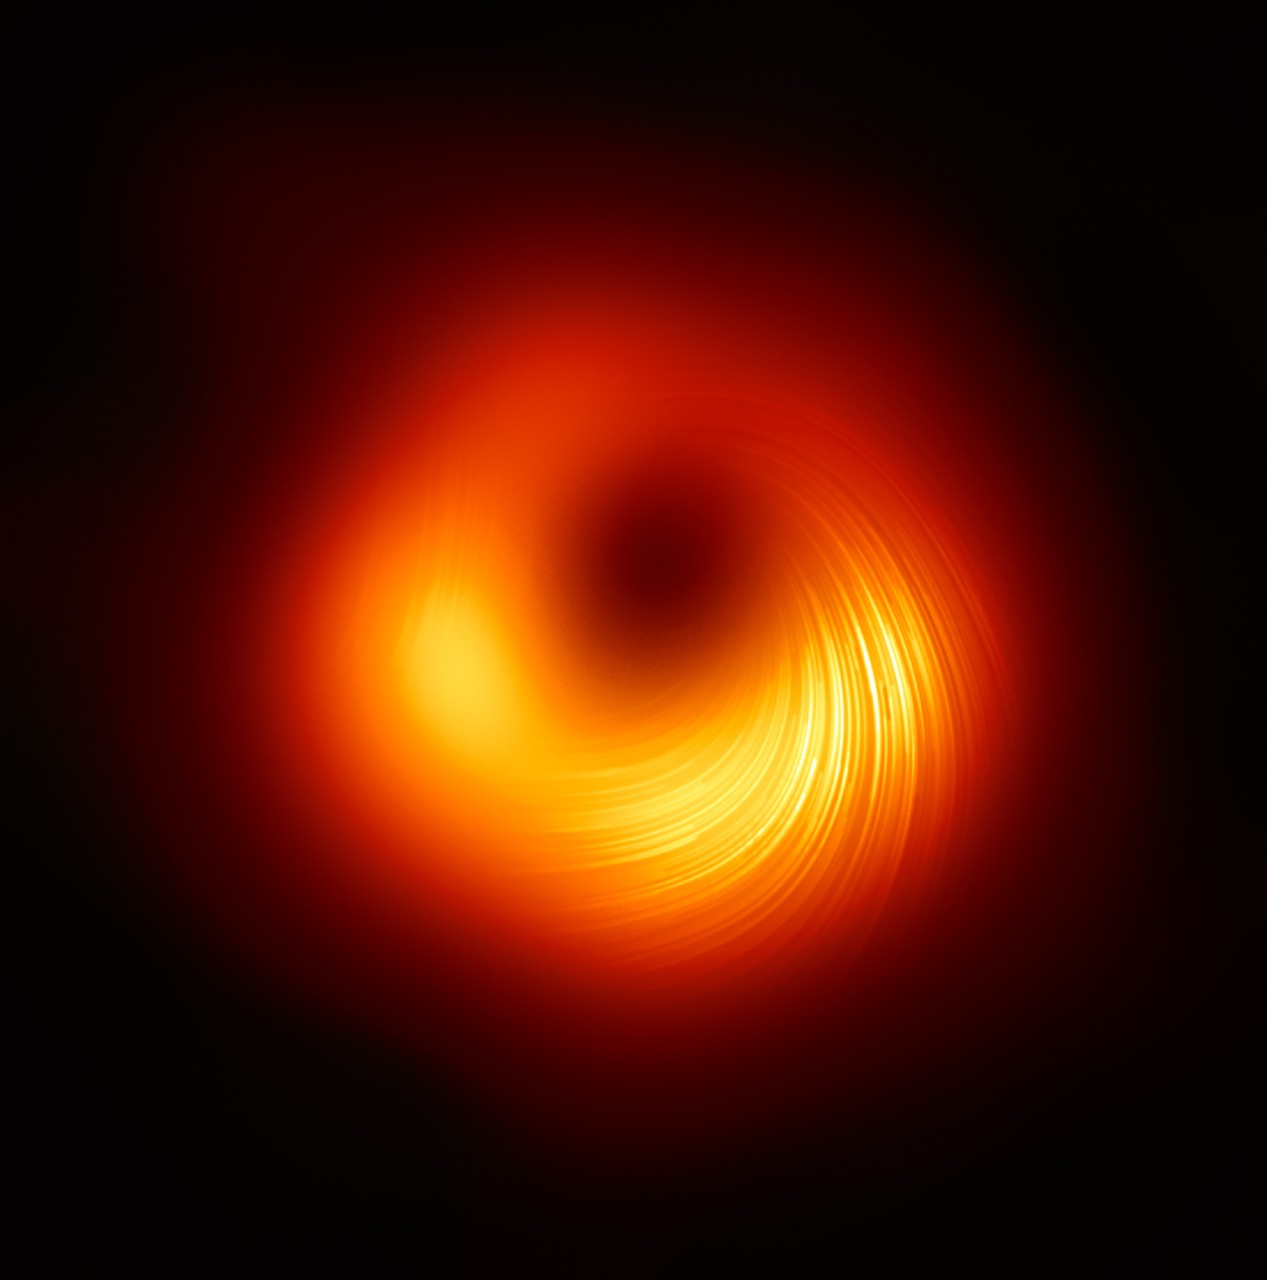 New image showing new findings of polarization and magnetic fields around M87 black hole.